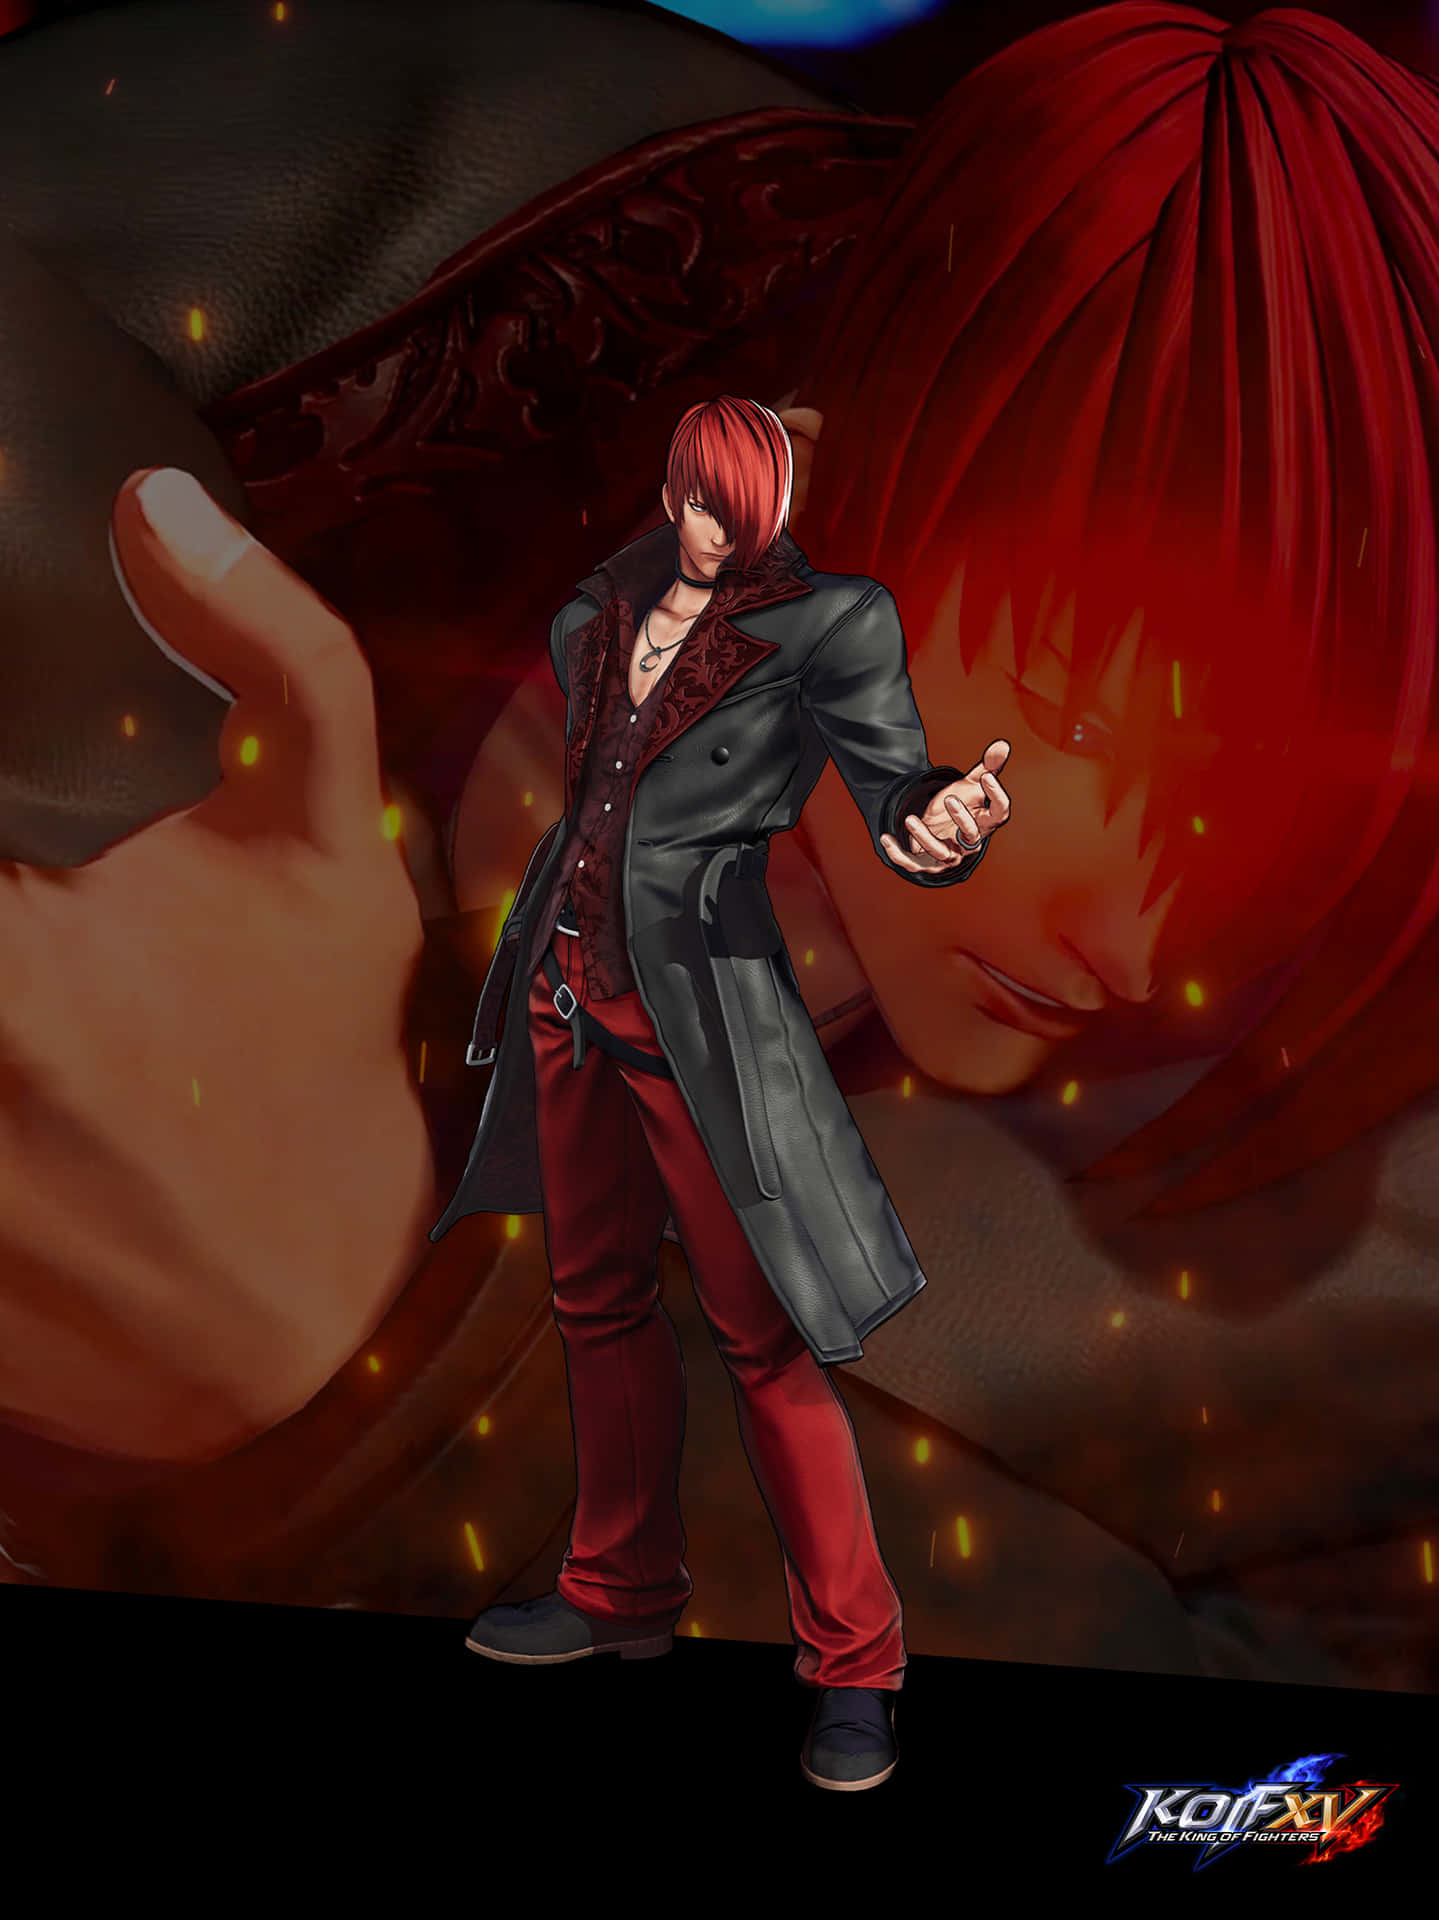 THE KING OF FIGHTERS XIII Team Yagami - Iori Yagami Character